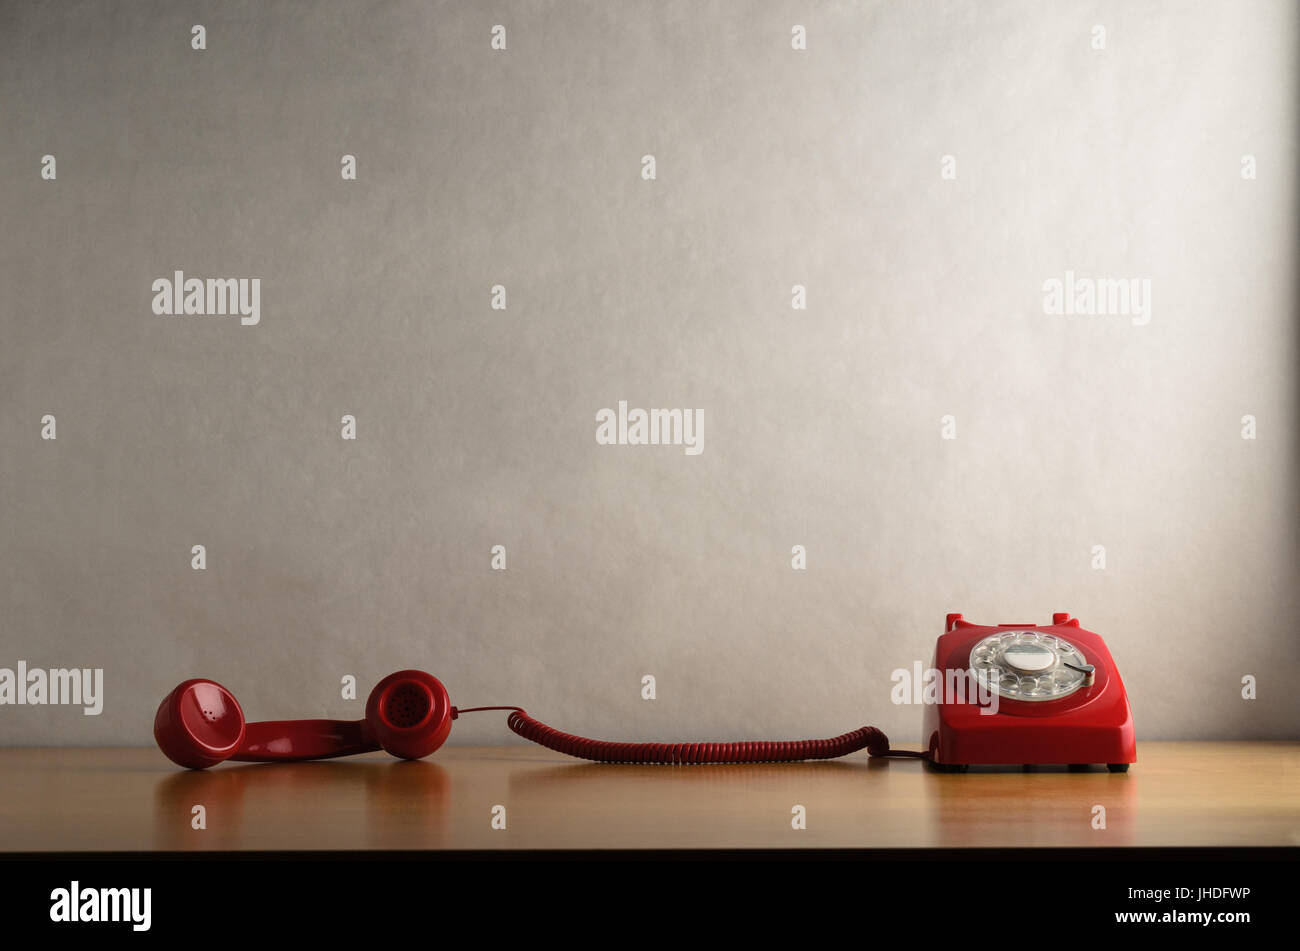 Eye level shot of a retro red dial up telephone on a light wood veneer desk or table with handset taken off the hook and trailed across it.  Off white Stock Photo